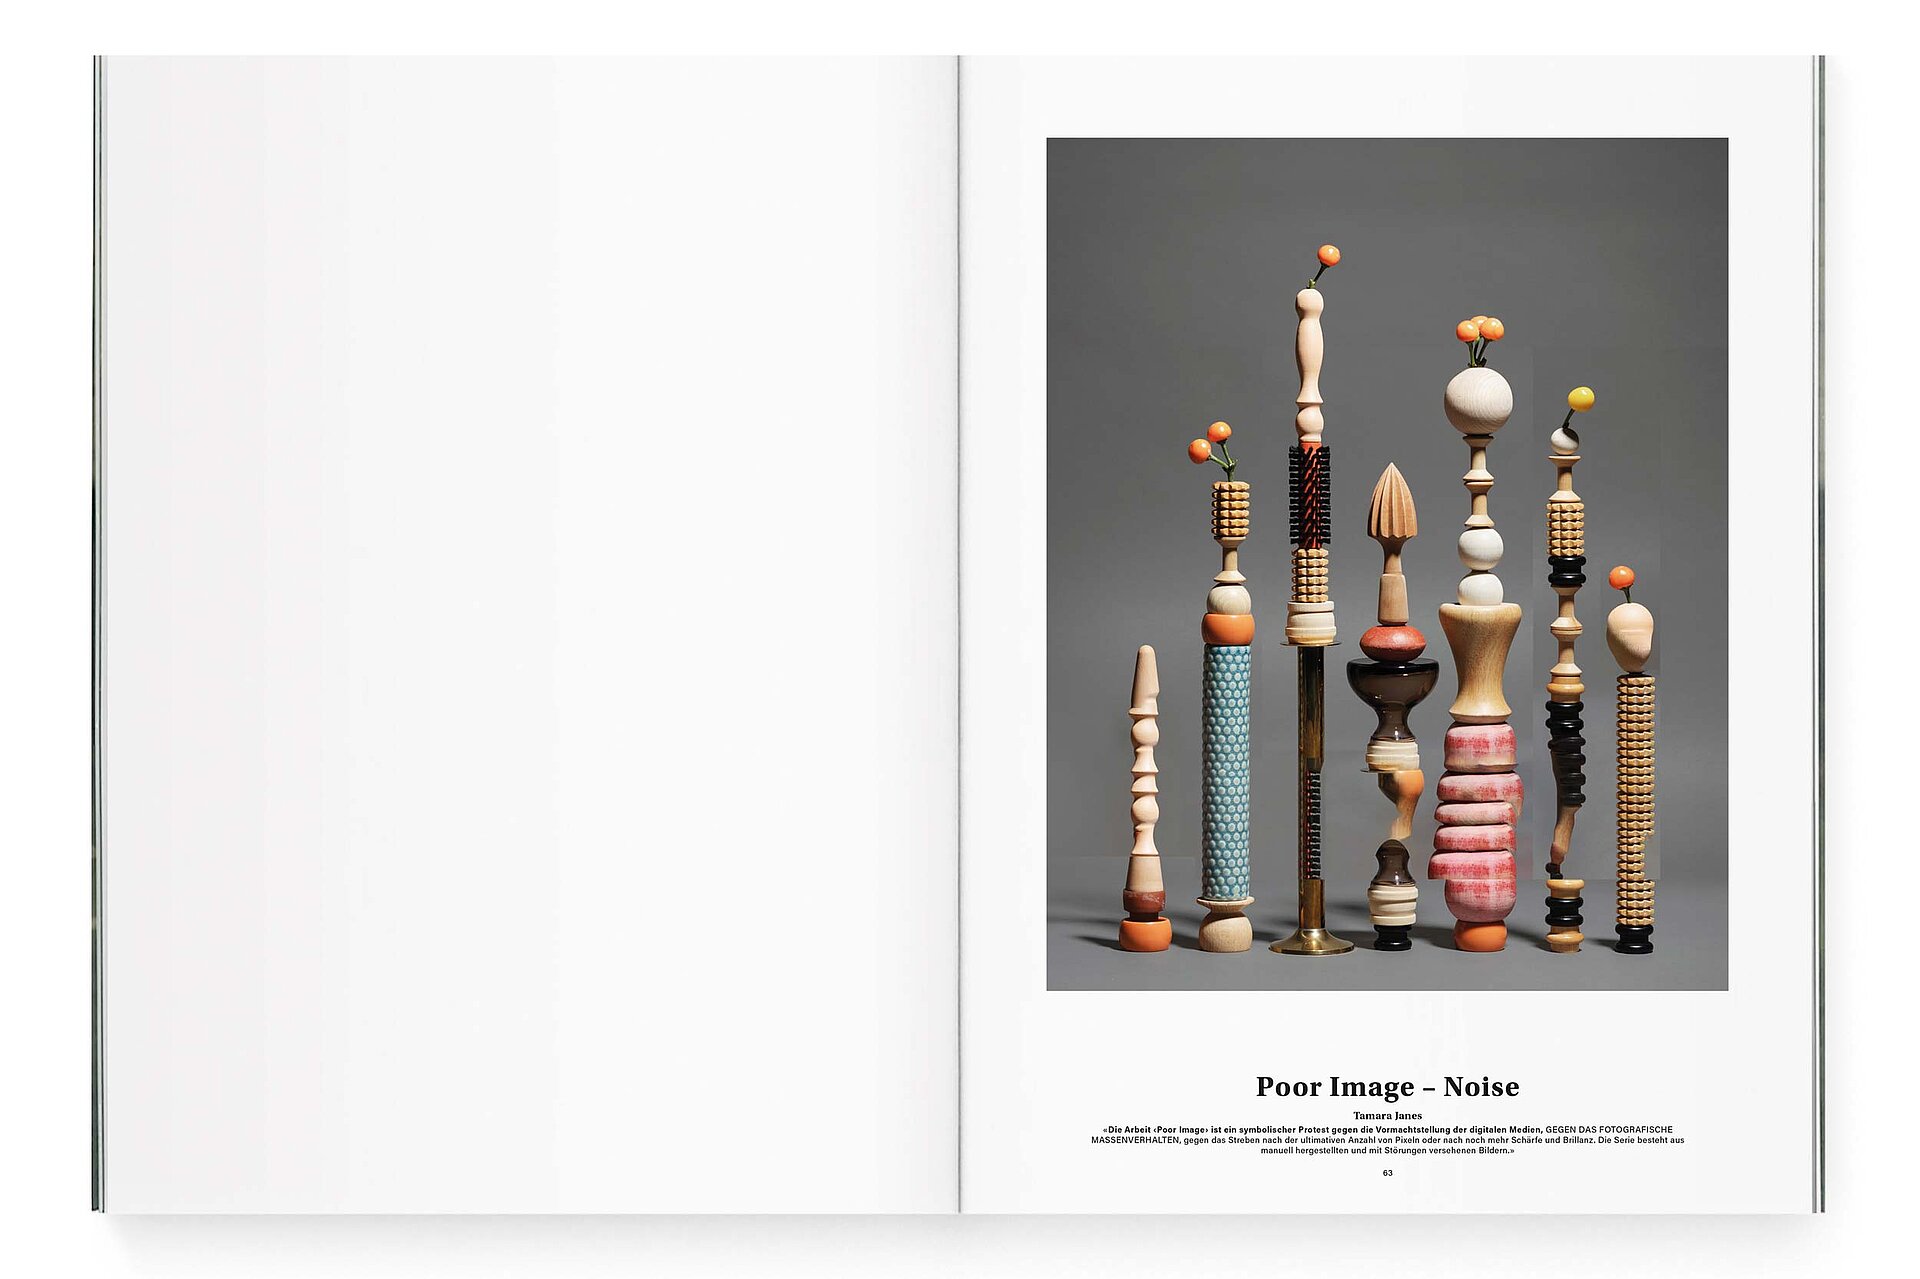 mjr magazine pages with vases design bern